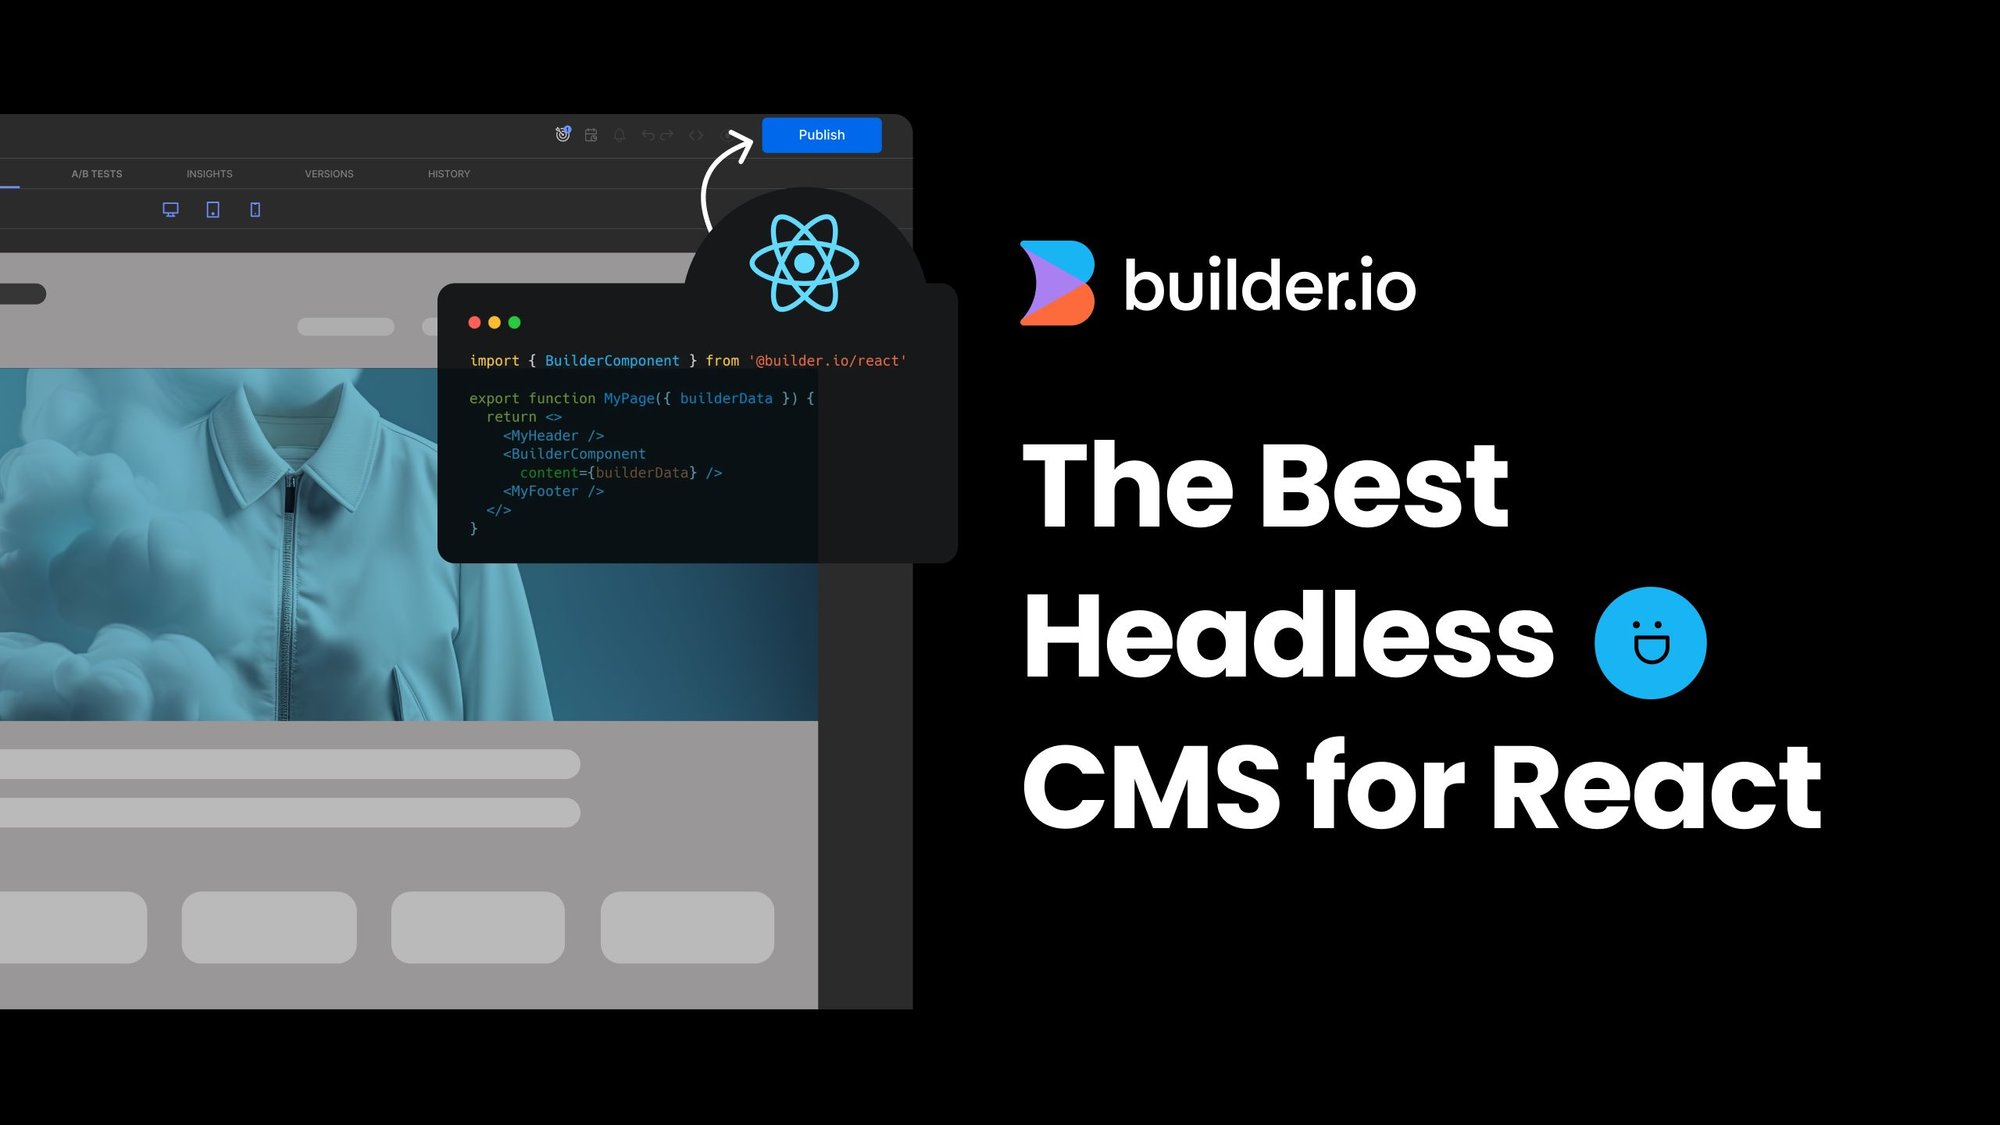 The Best Headless CMS for React